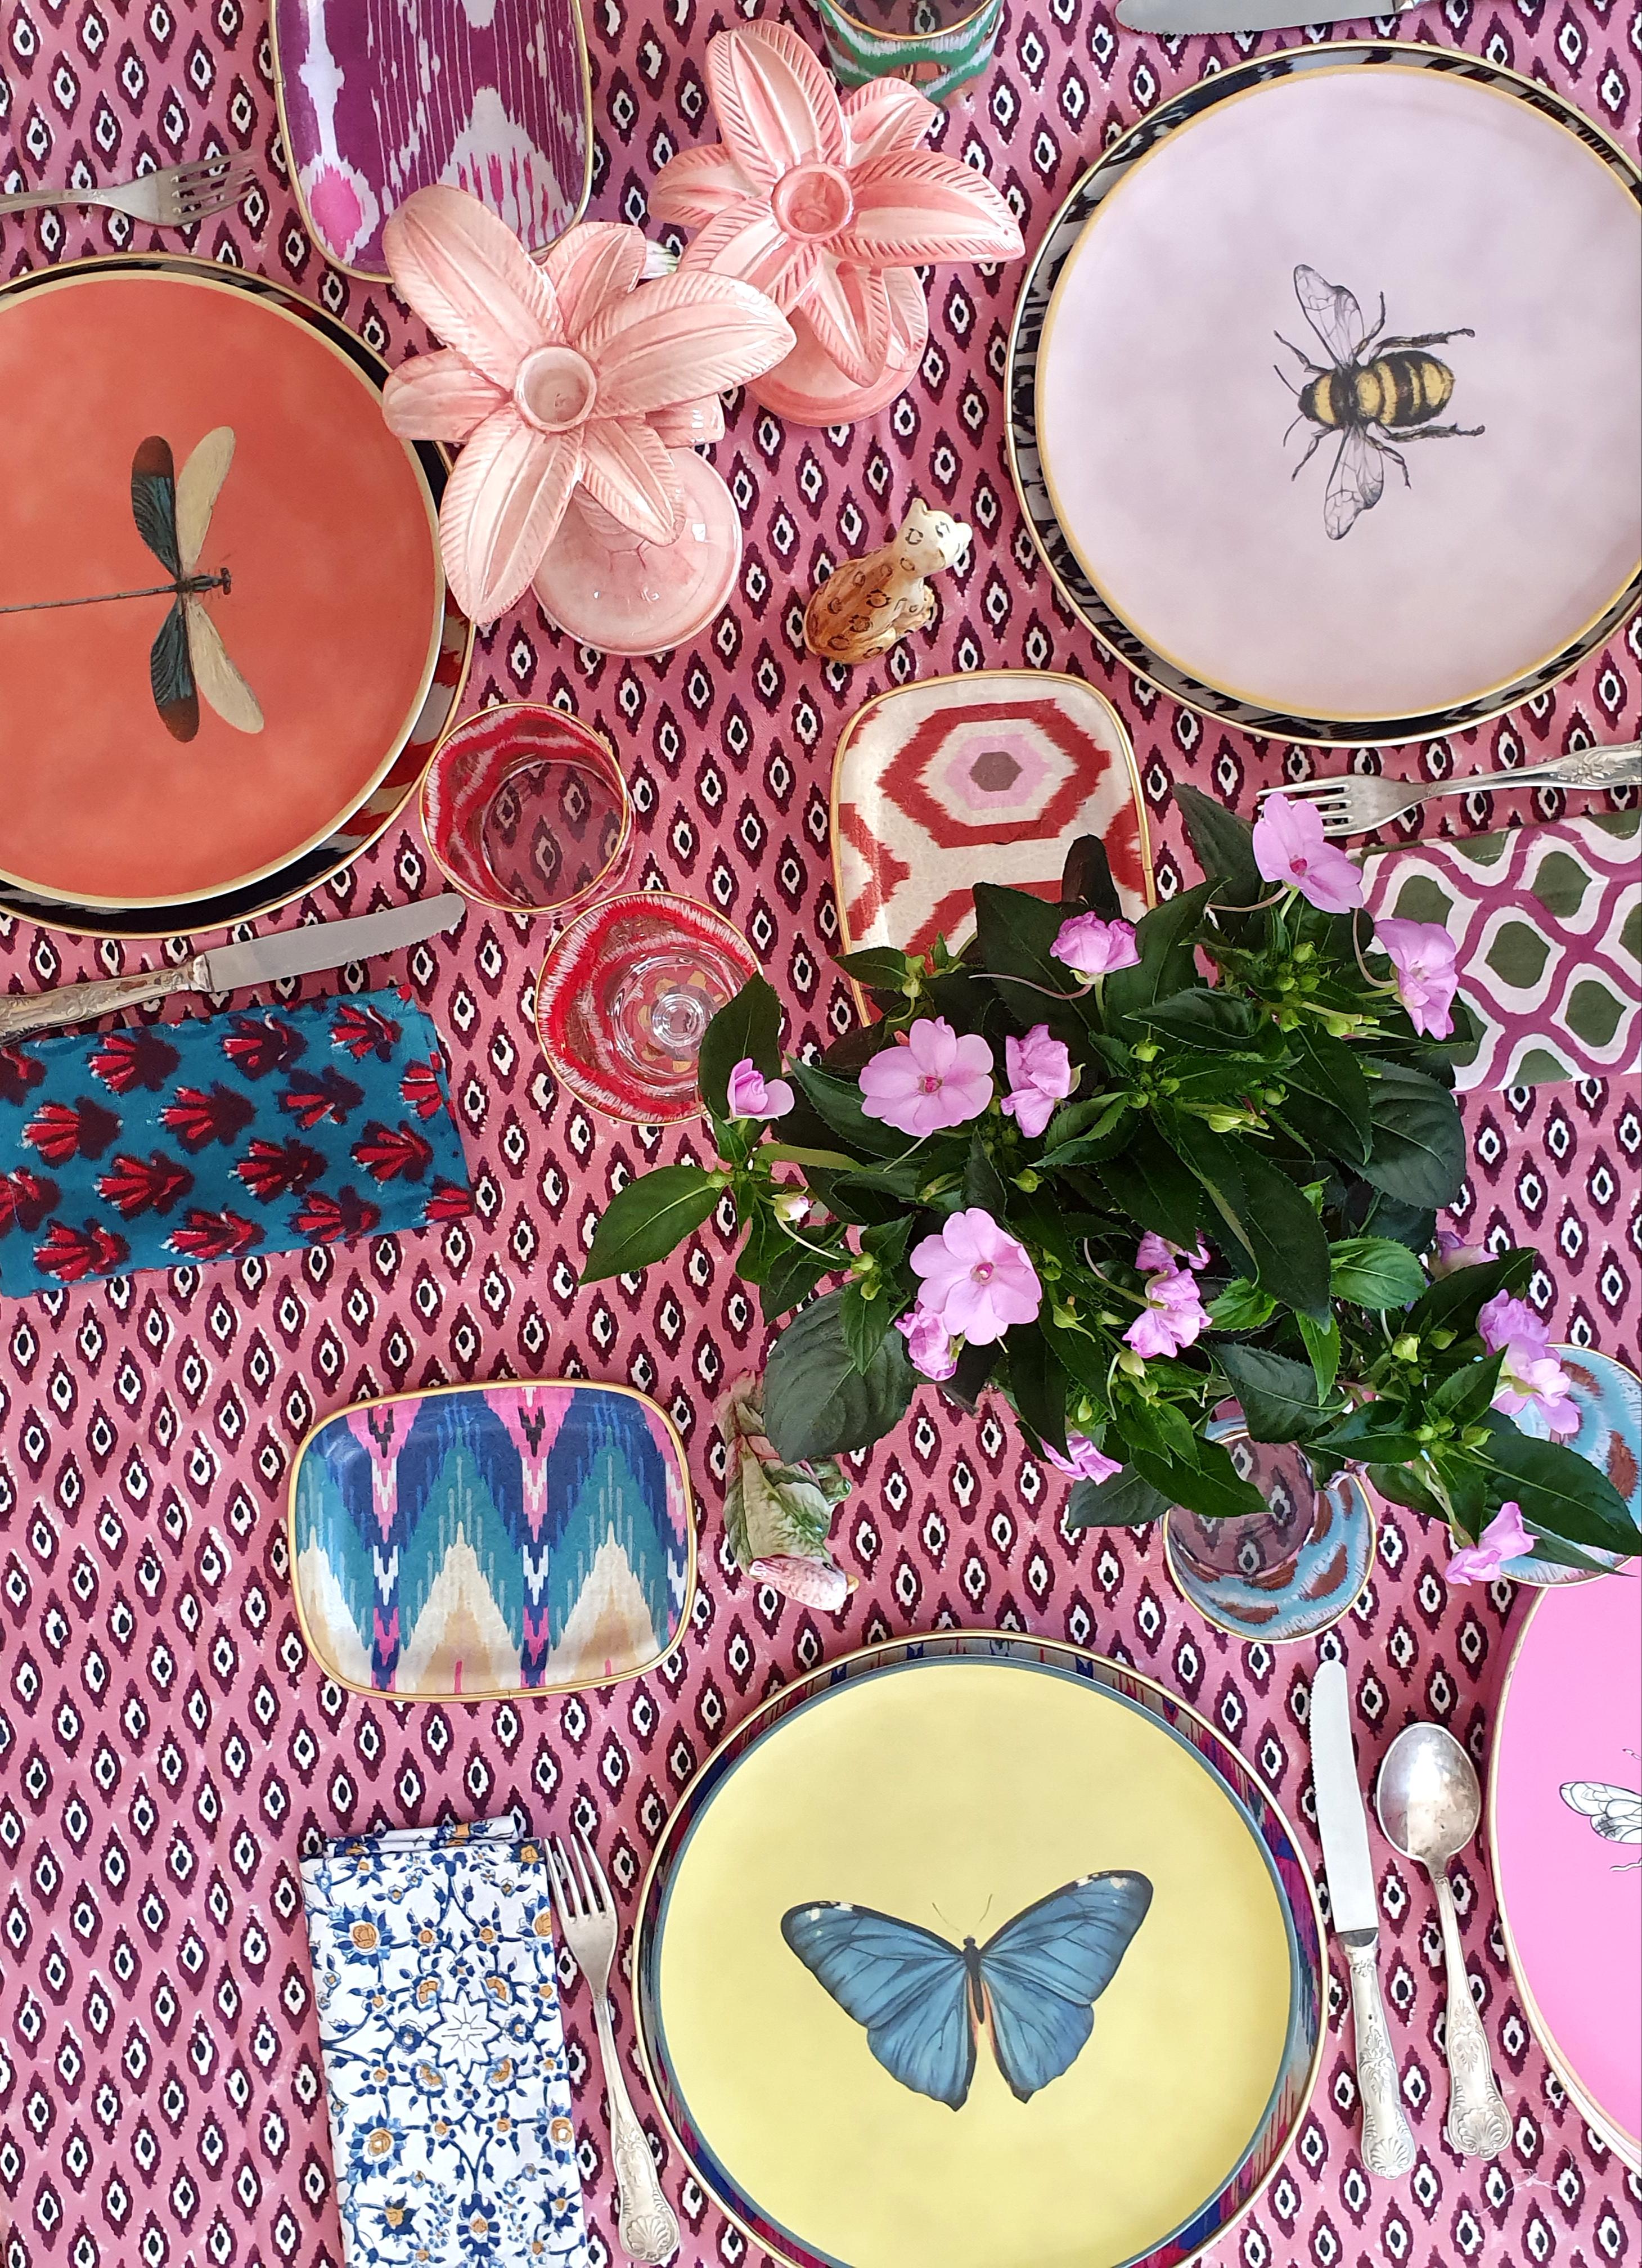 What is more colorful than a colorfulr insect?
Butterflies, dragonflies, beed and ladybugs will make your table sparkle.